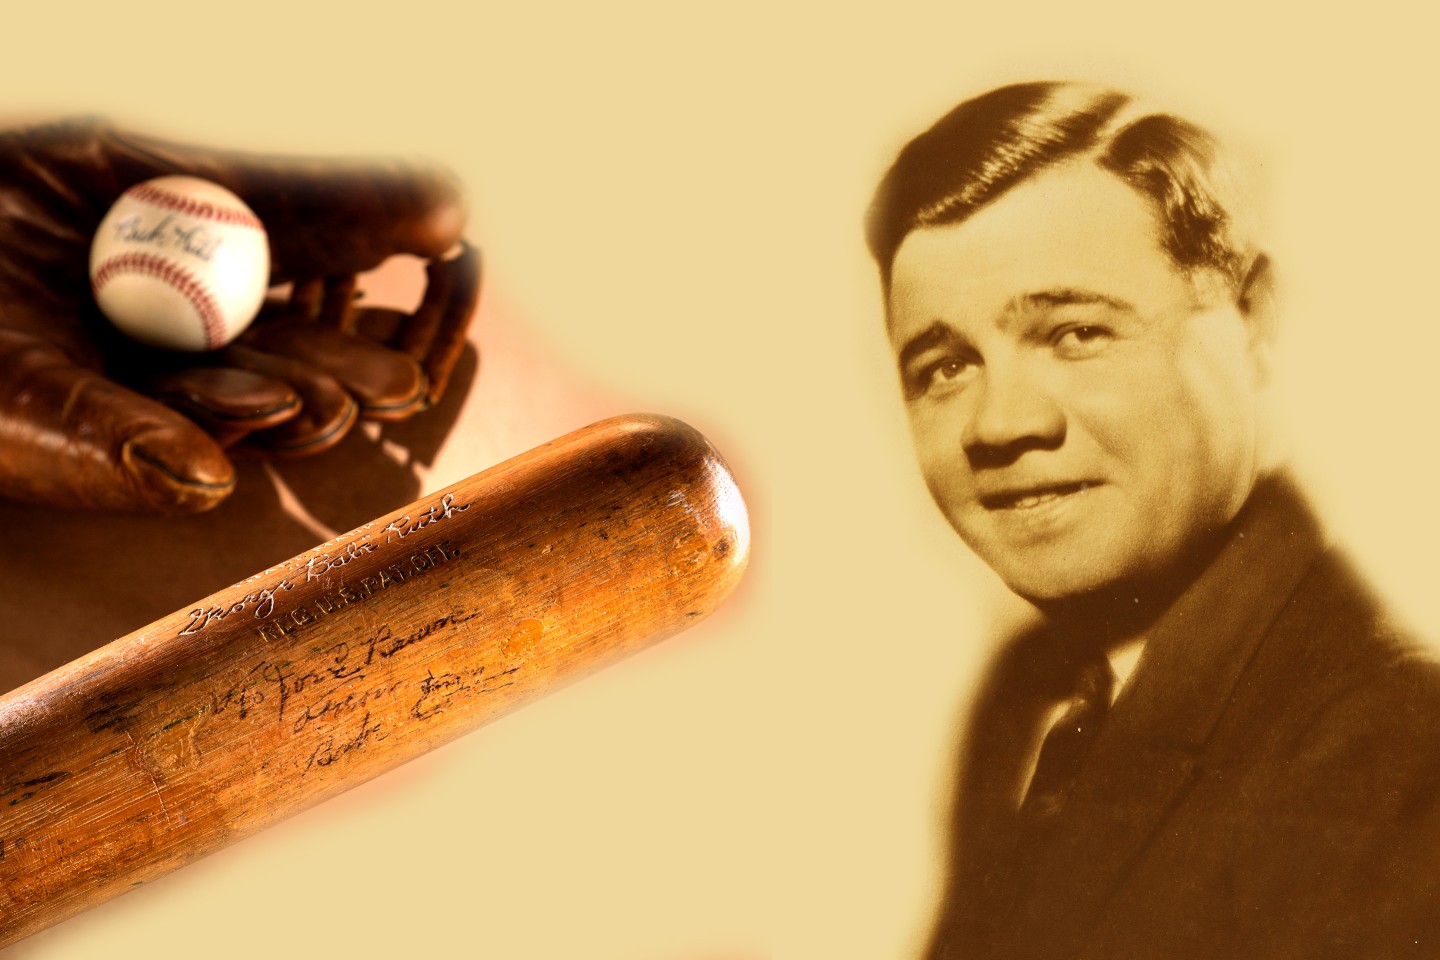 Babe Ruth 1927 Baseball Bat | Auction House: Heritage Auctions | Price fetched: $660,000 | Auctioned: May 18, 2018